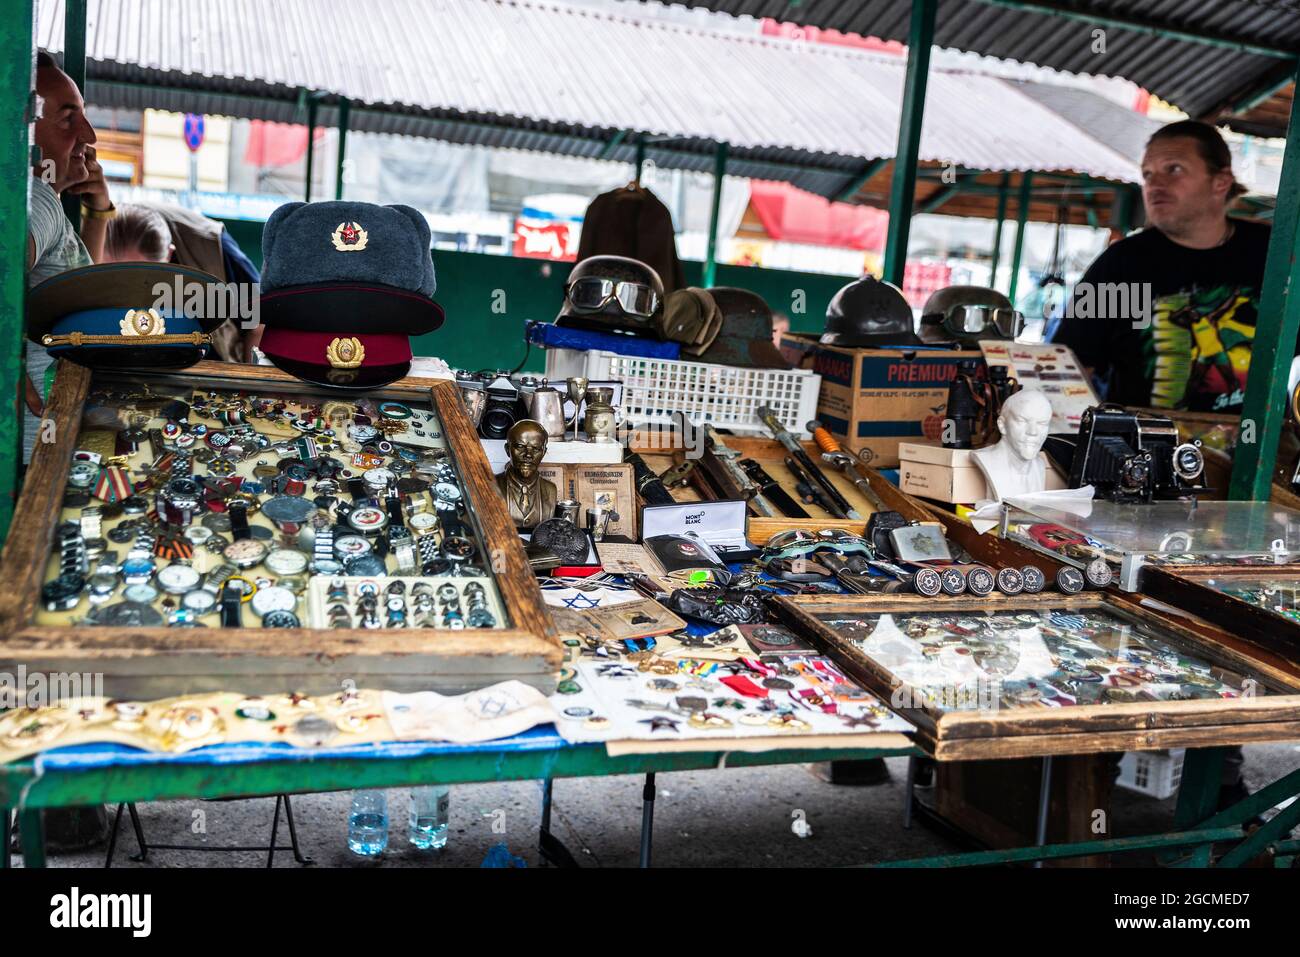 Krakow, Poland - August 28, 2018: Vendor in the flea market of the Plac Nowy that showcase an assortment of antiques in Krakow, Poland Stock Photo